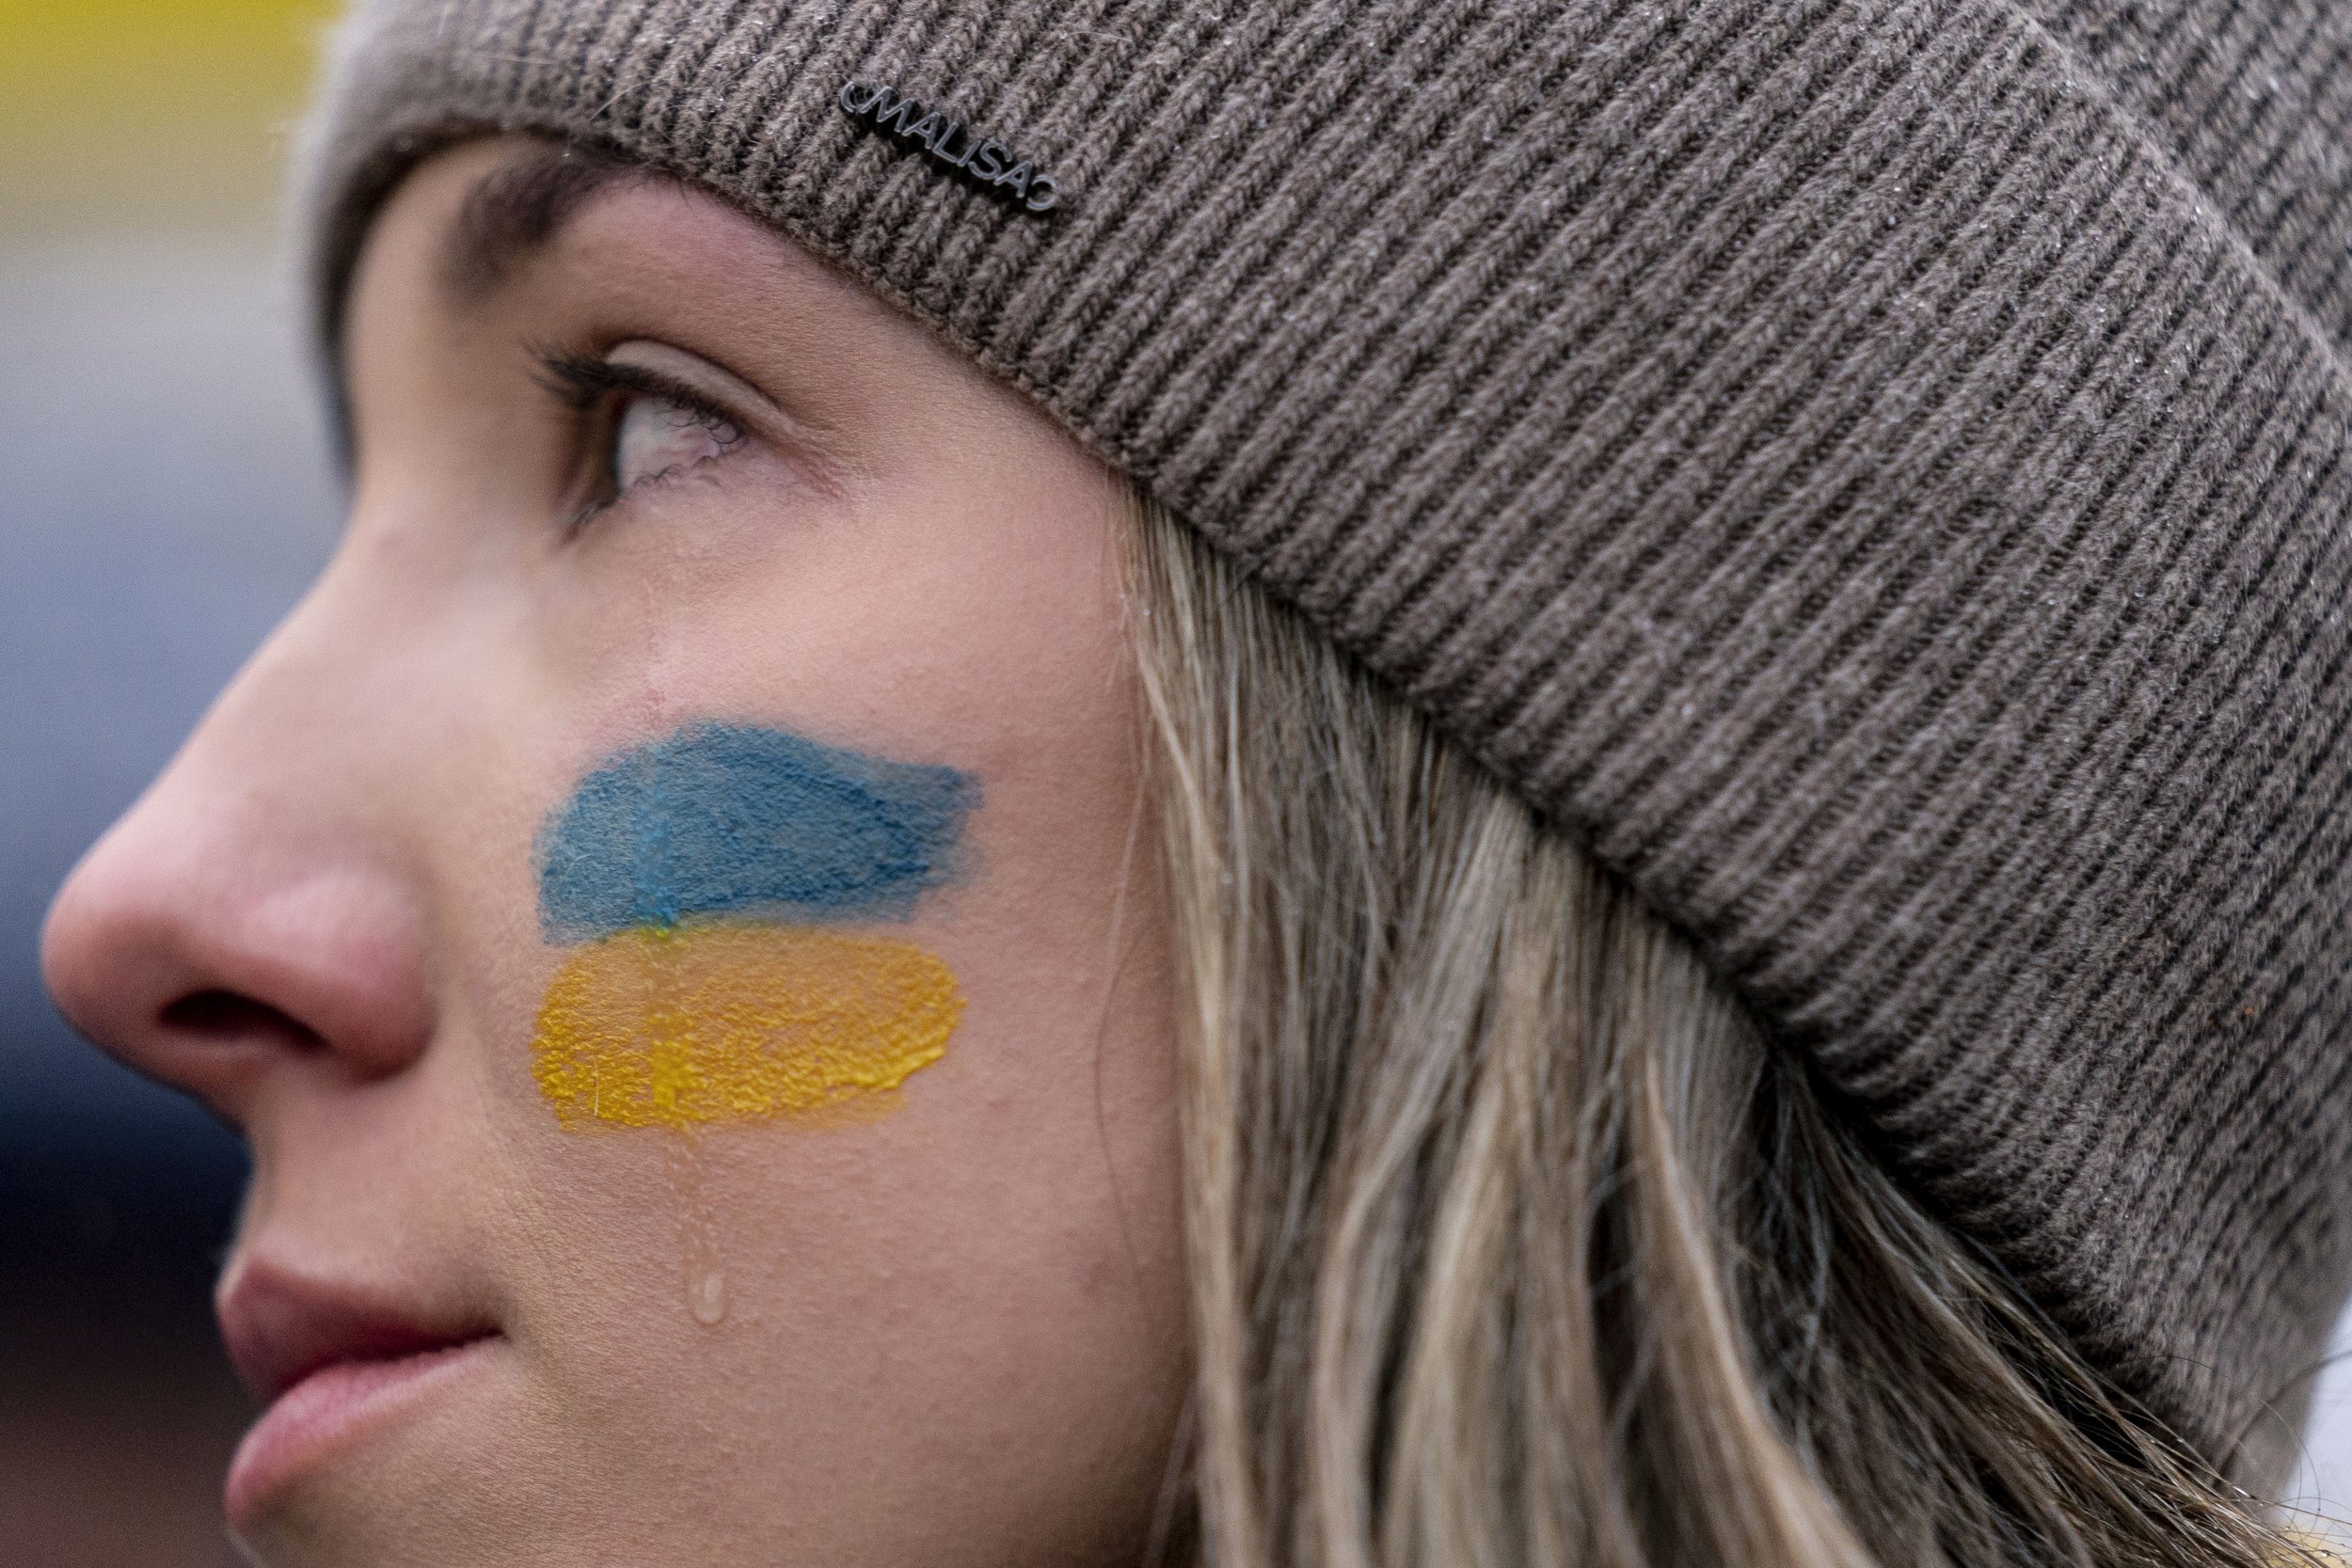  A tear rolls down through the colors of the Ukrainian flag on the cheek of Ukranian Oleksandra Yashan of Arlington, Va., as she becomes emotional during a vigil to protest the Russian invasion of Ukraine in Lafayette Park in front of the White House